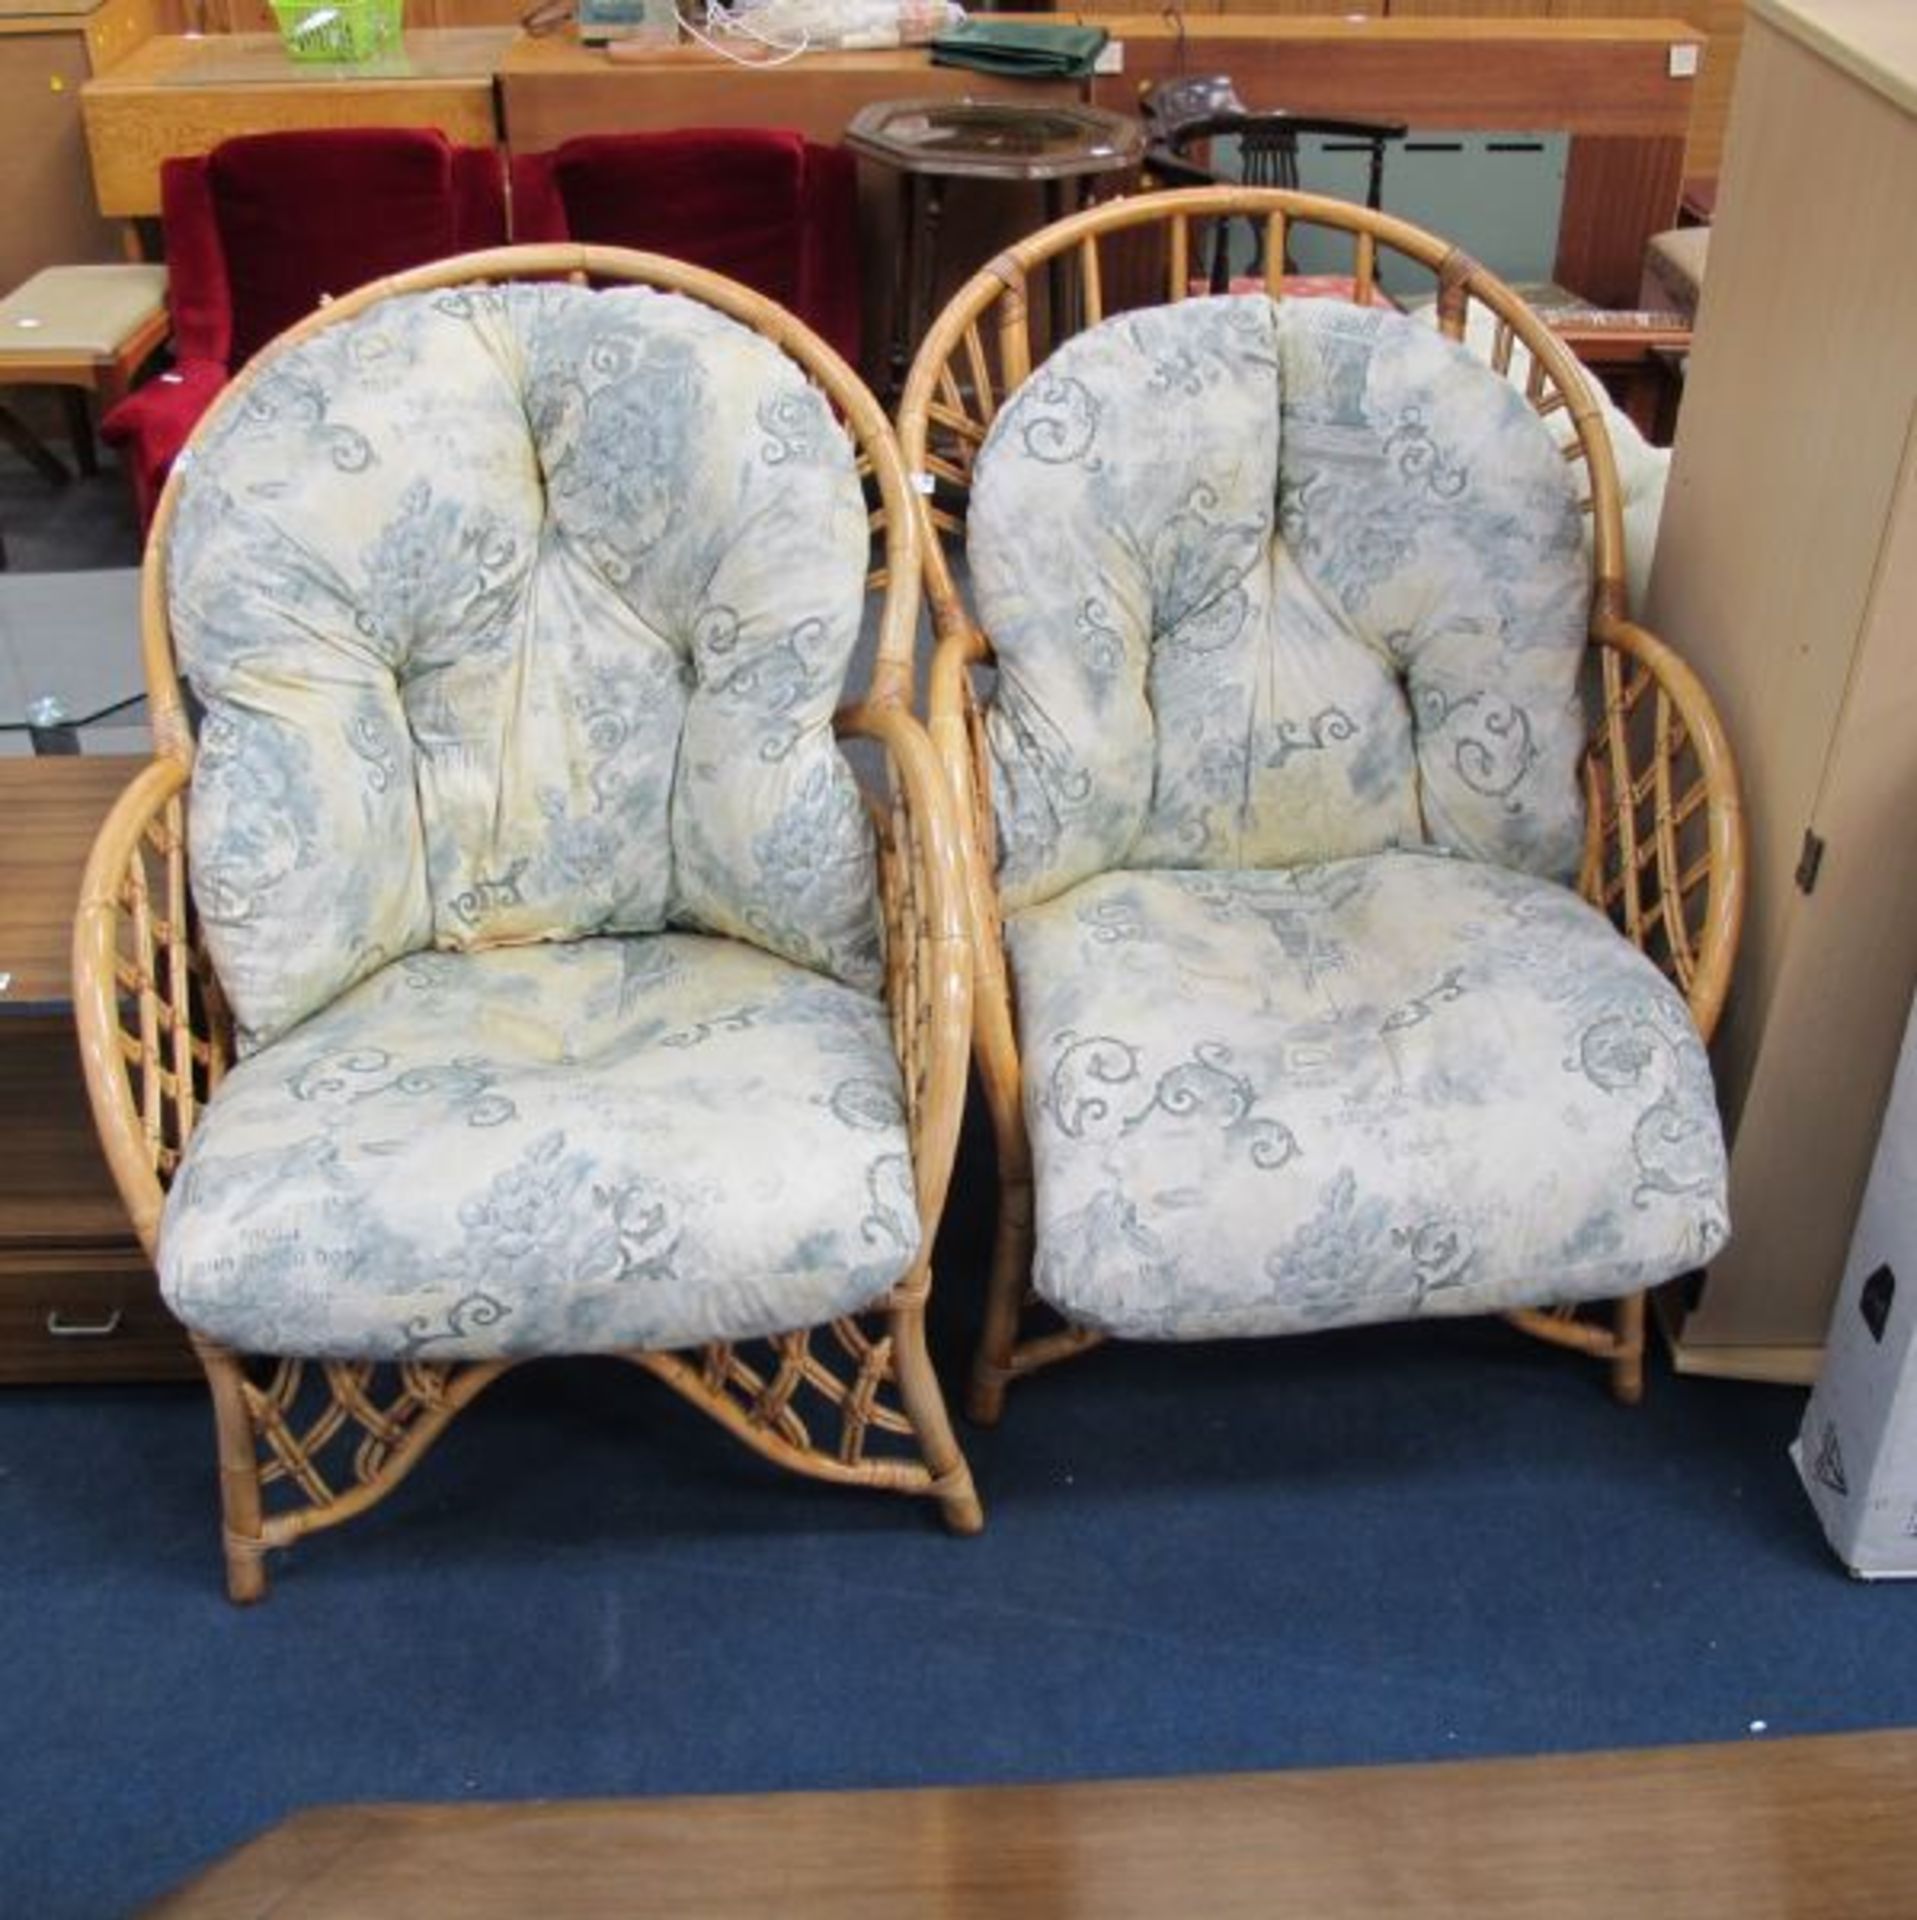 A Pair of Cane Conservatory Armchairs; A Narrow Sliding Door Bookcase/Cupboard and a TV/Video Stand.